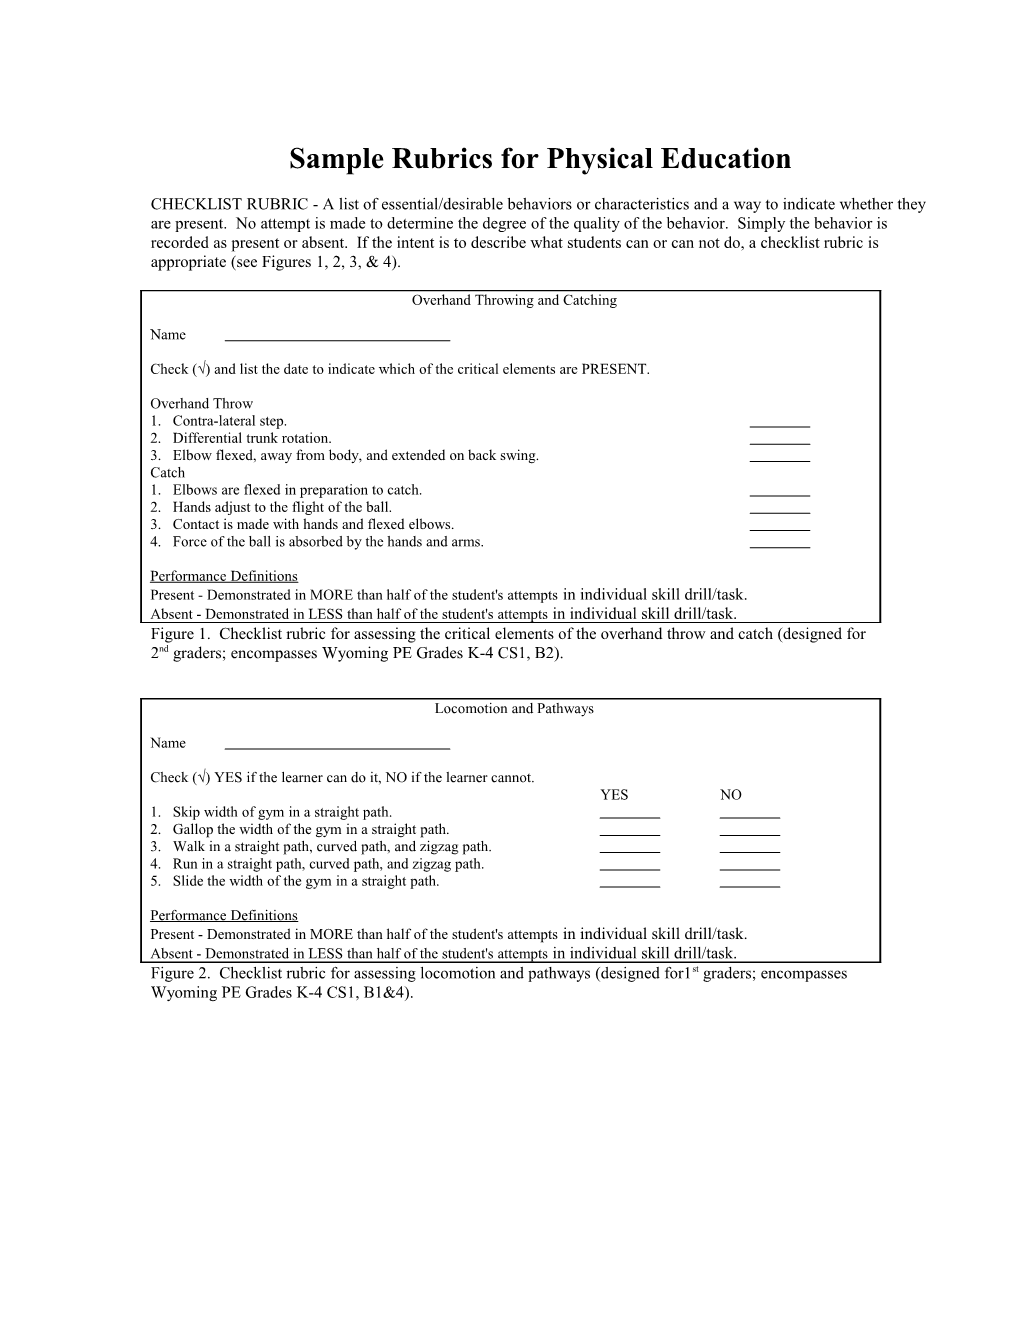 Sample Rubrics for Physical Education